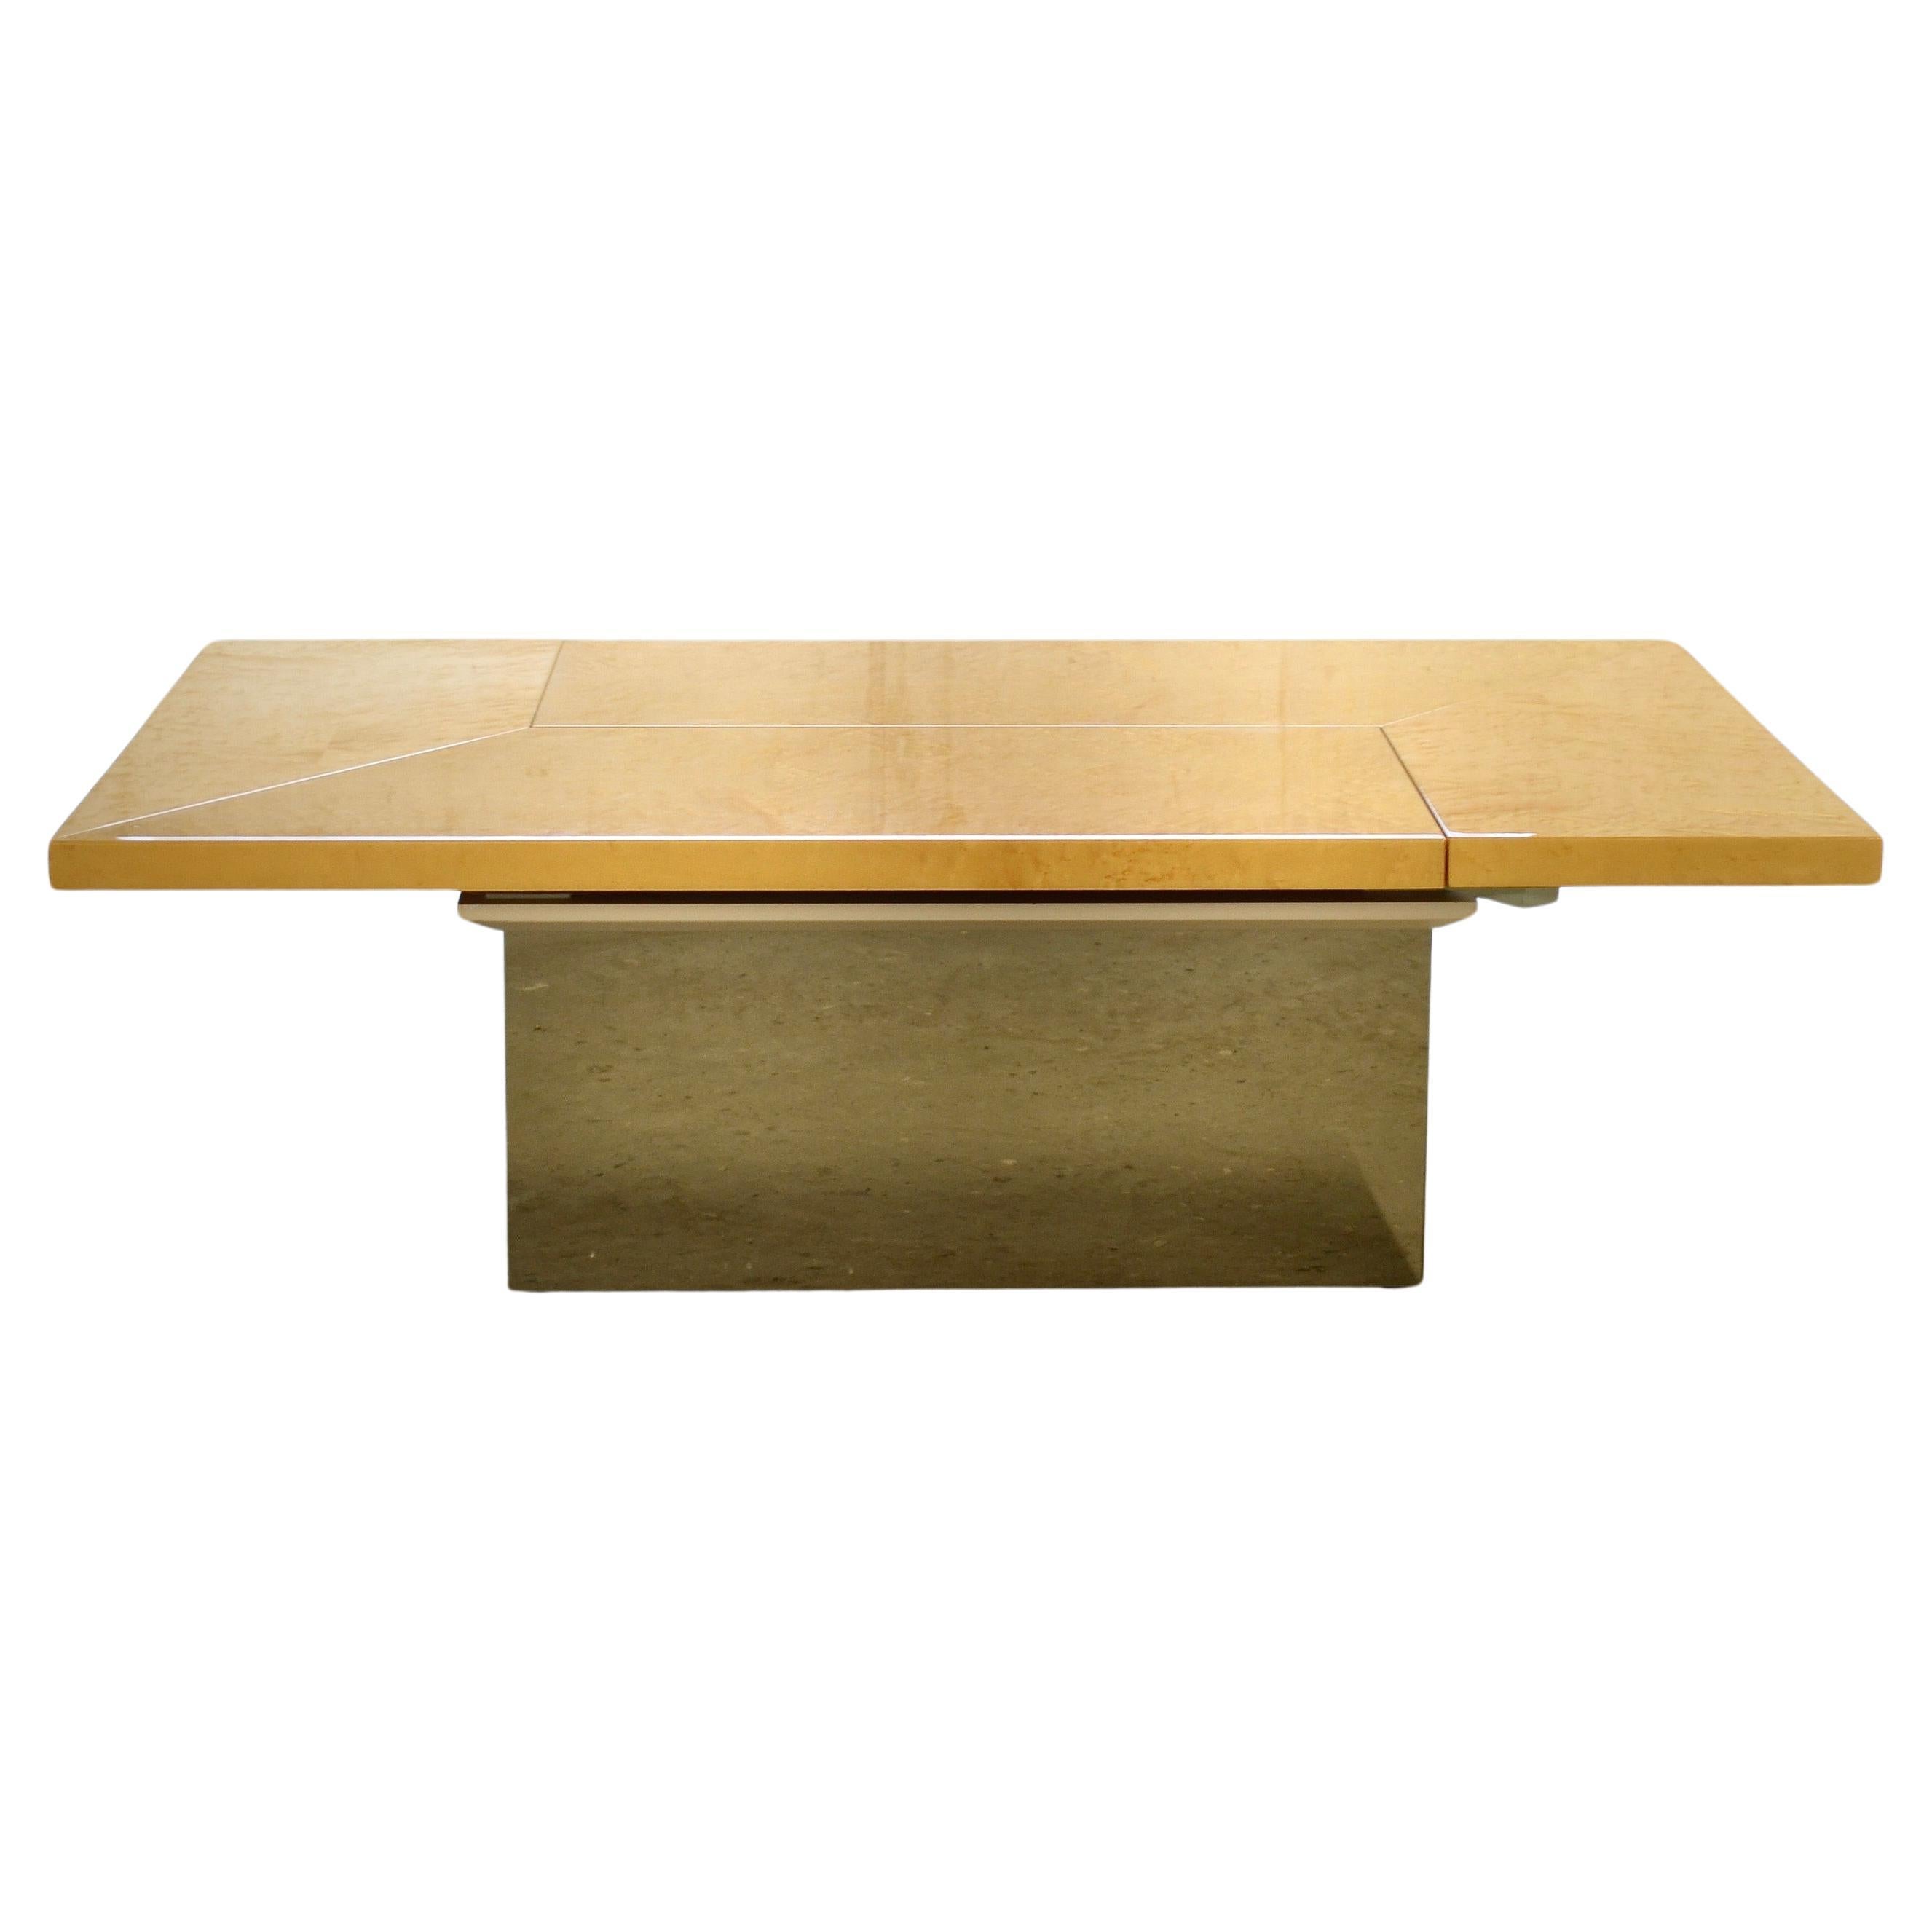 Maple coffee table & bar, Paul Michel, France, 1980's For Sale